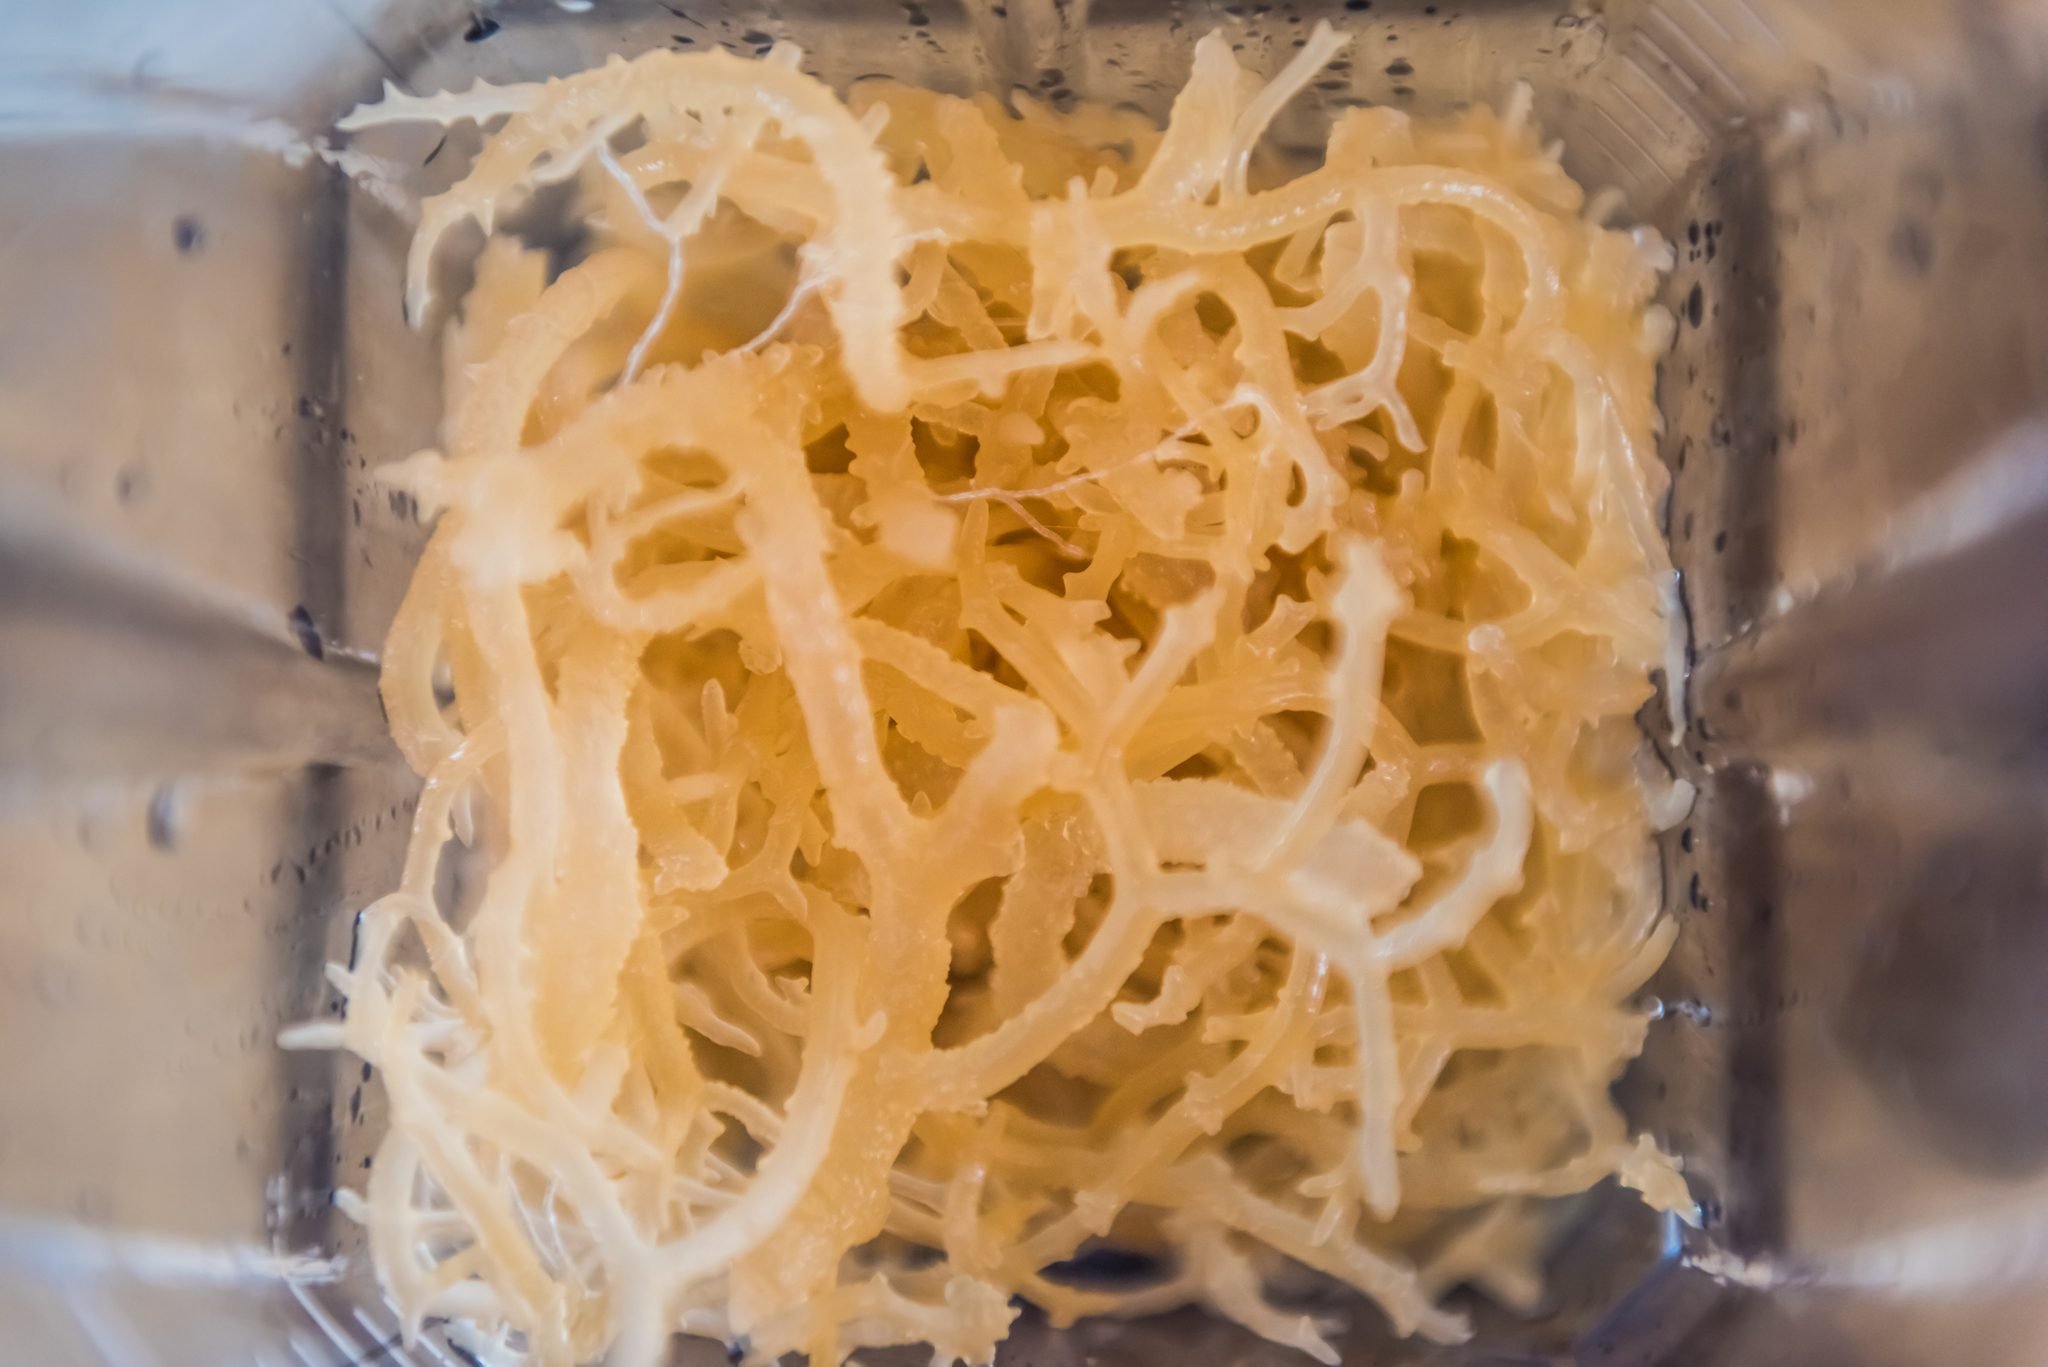 Sea Moss Sea Moss Benefits, Nutrition, and How to Use It The Healthy